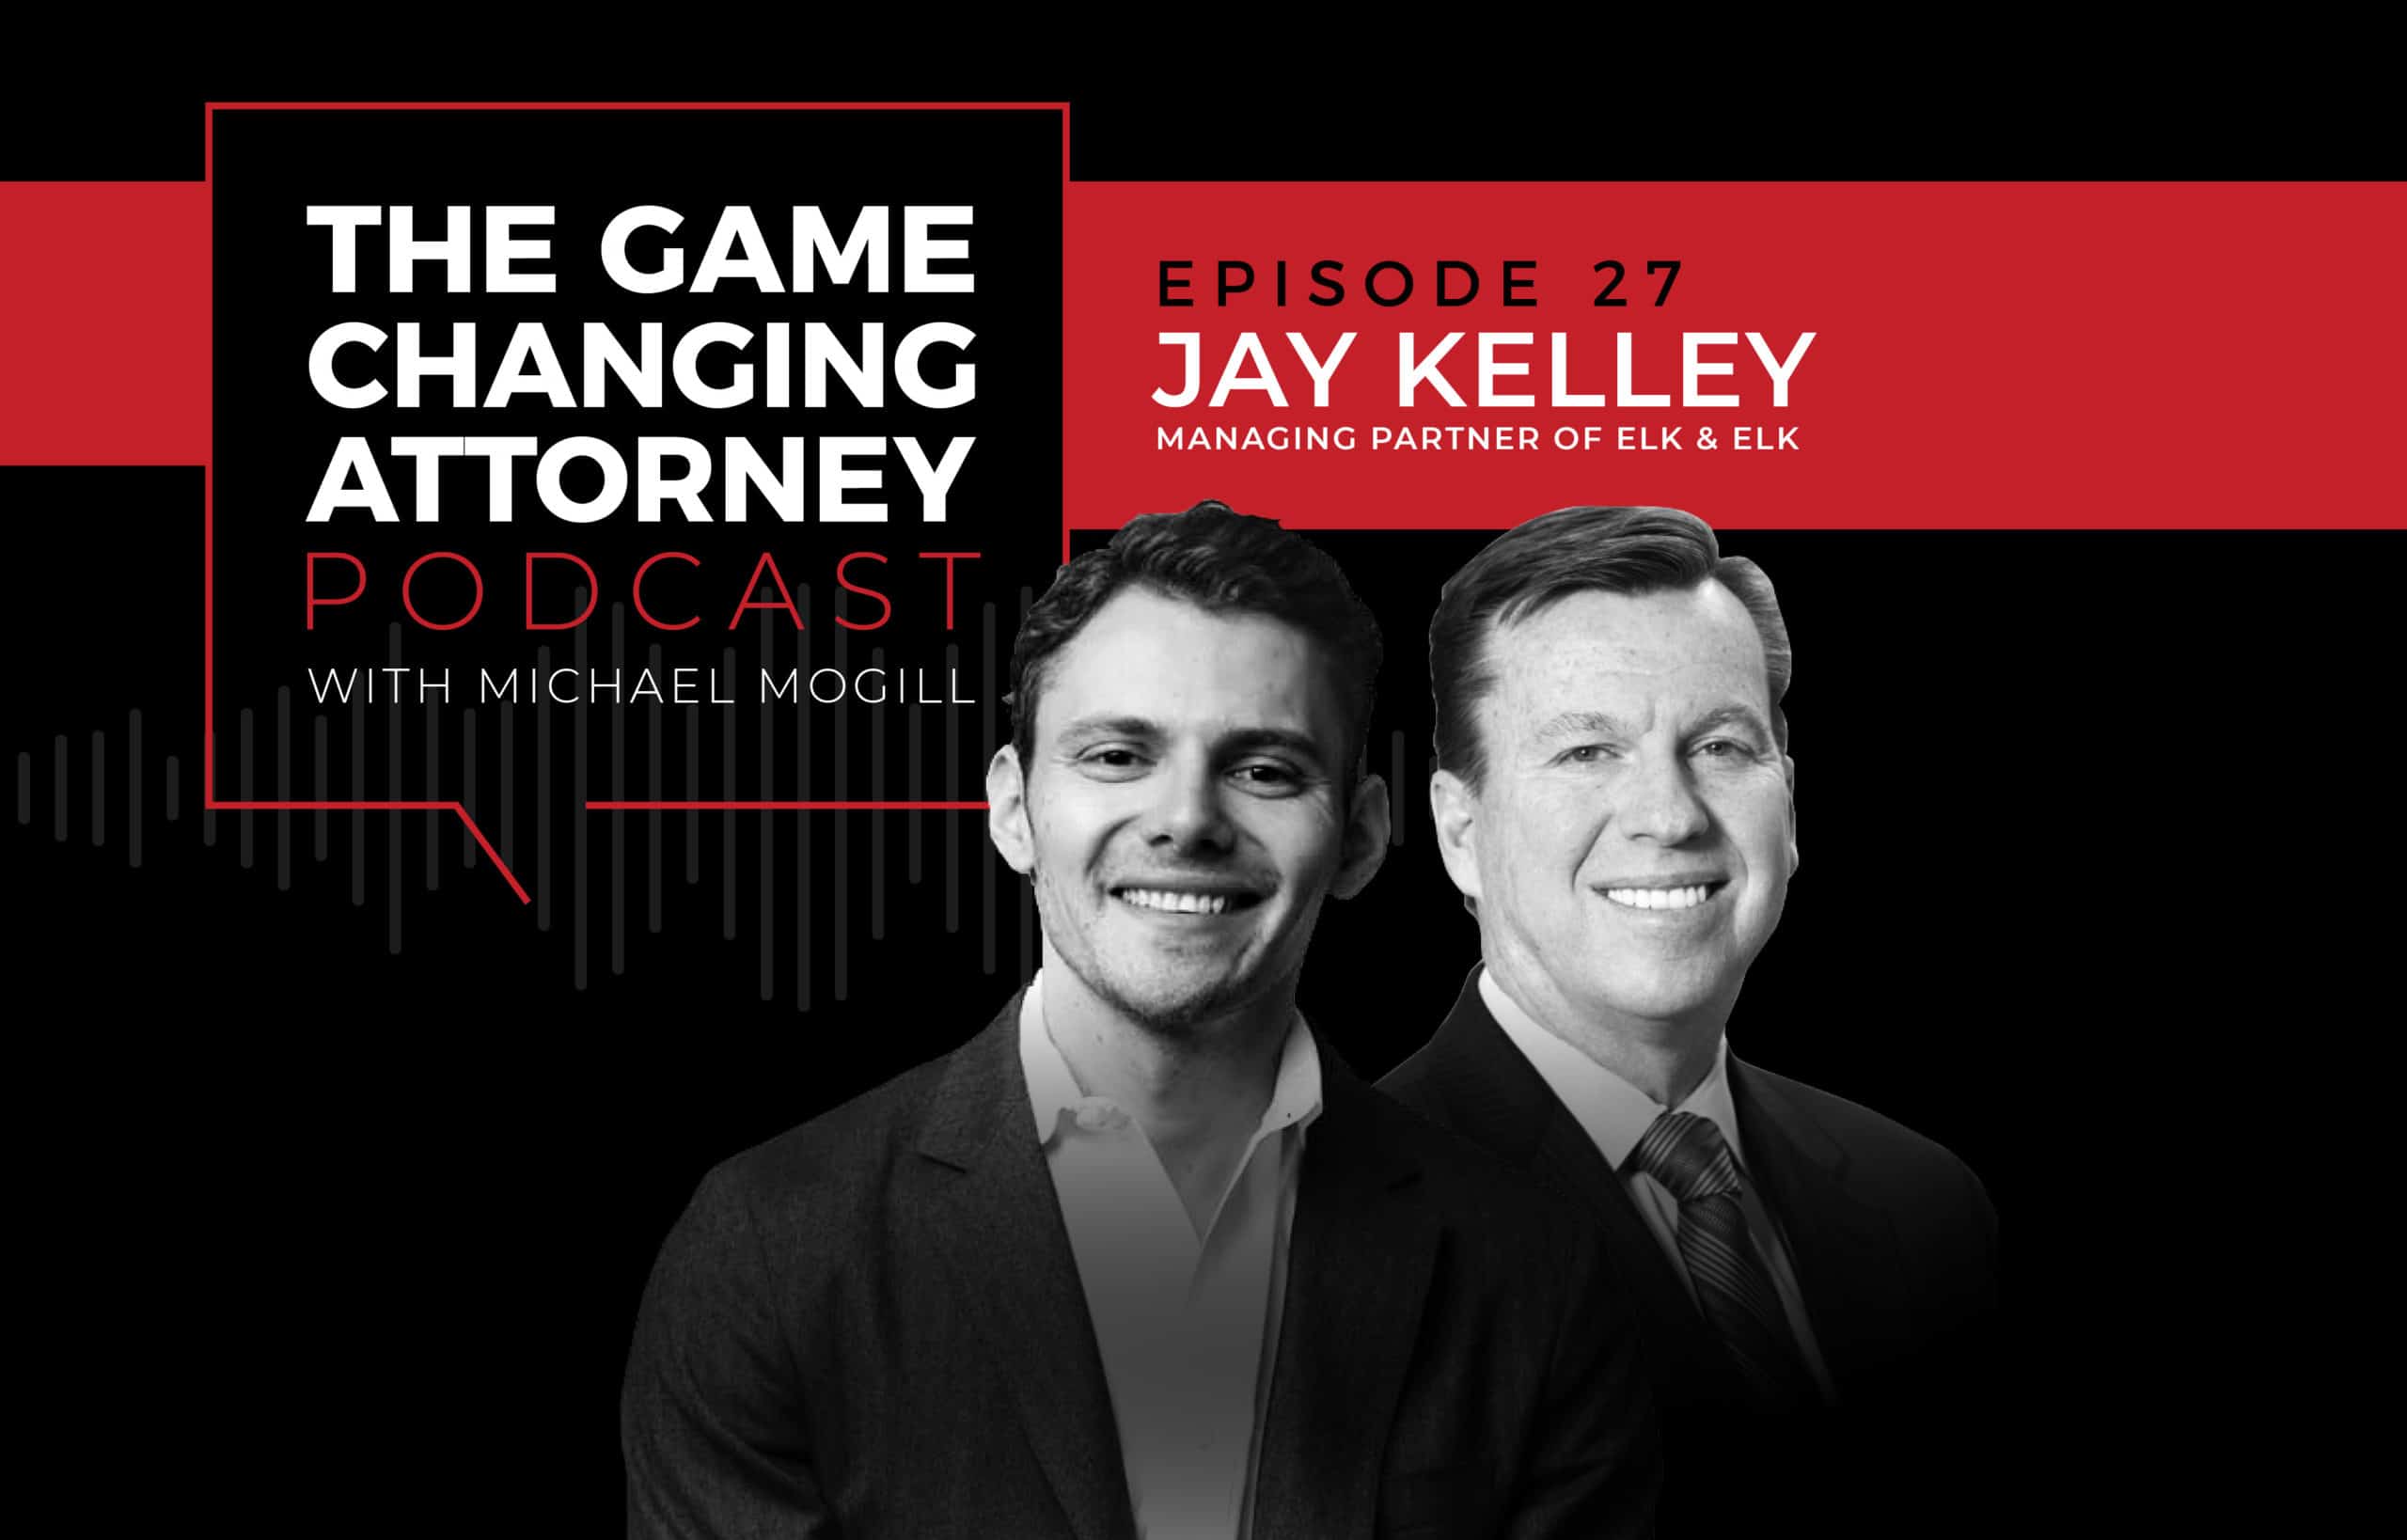 Jay Kelley - The Game Changing Attorney Podcast - Mobile